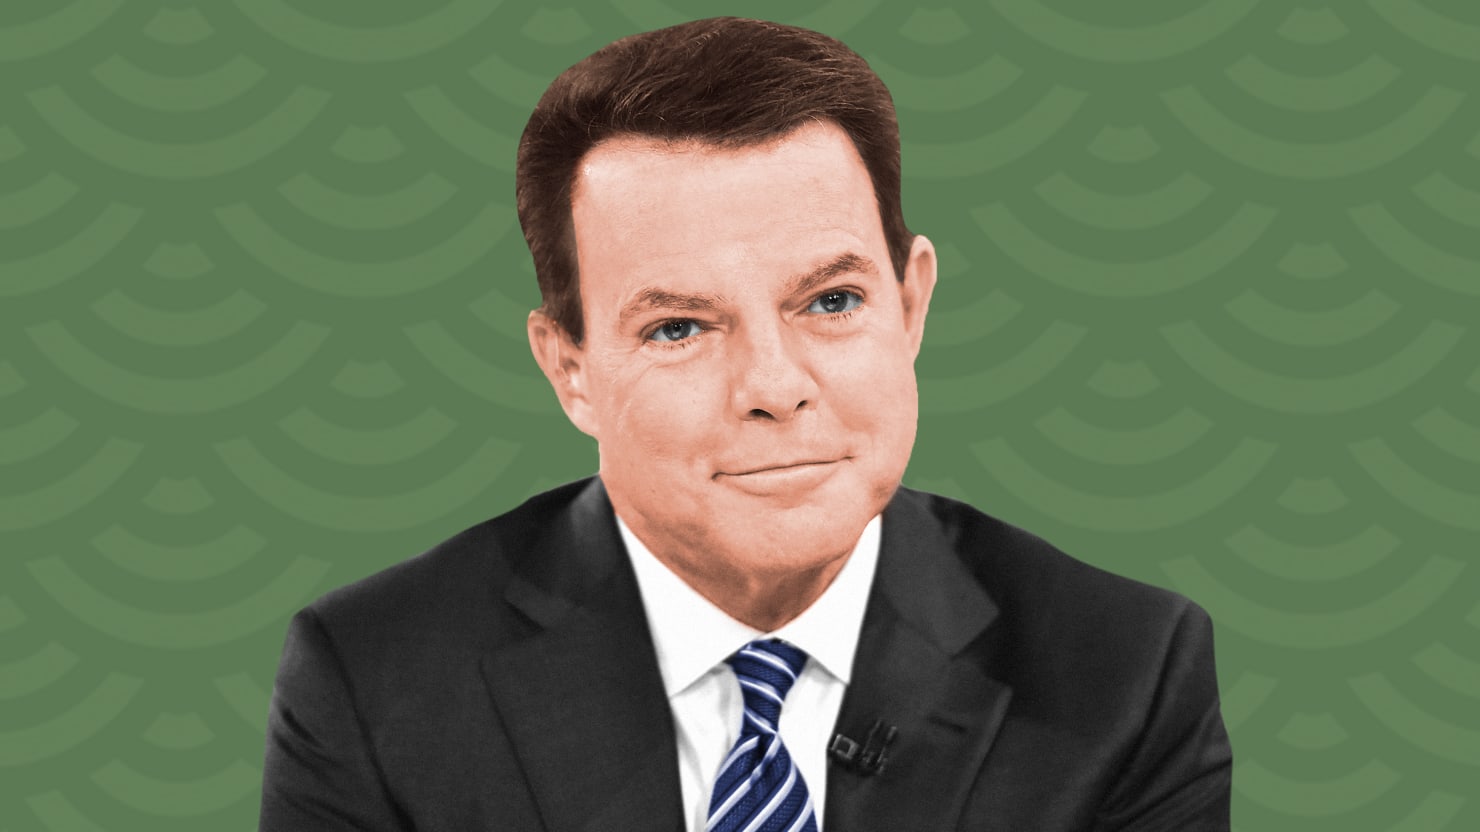 ExFox News Host Shepard Smith Vows to Fight Disinformation With New